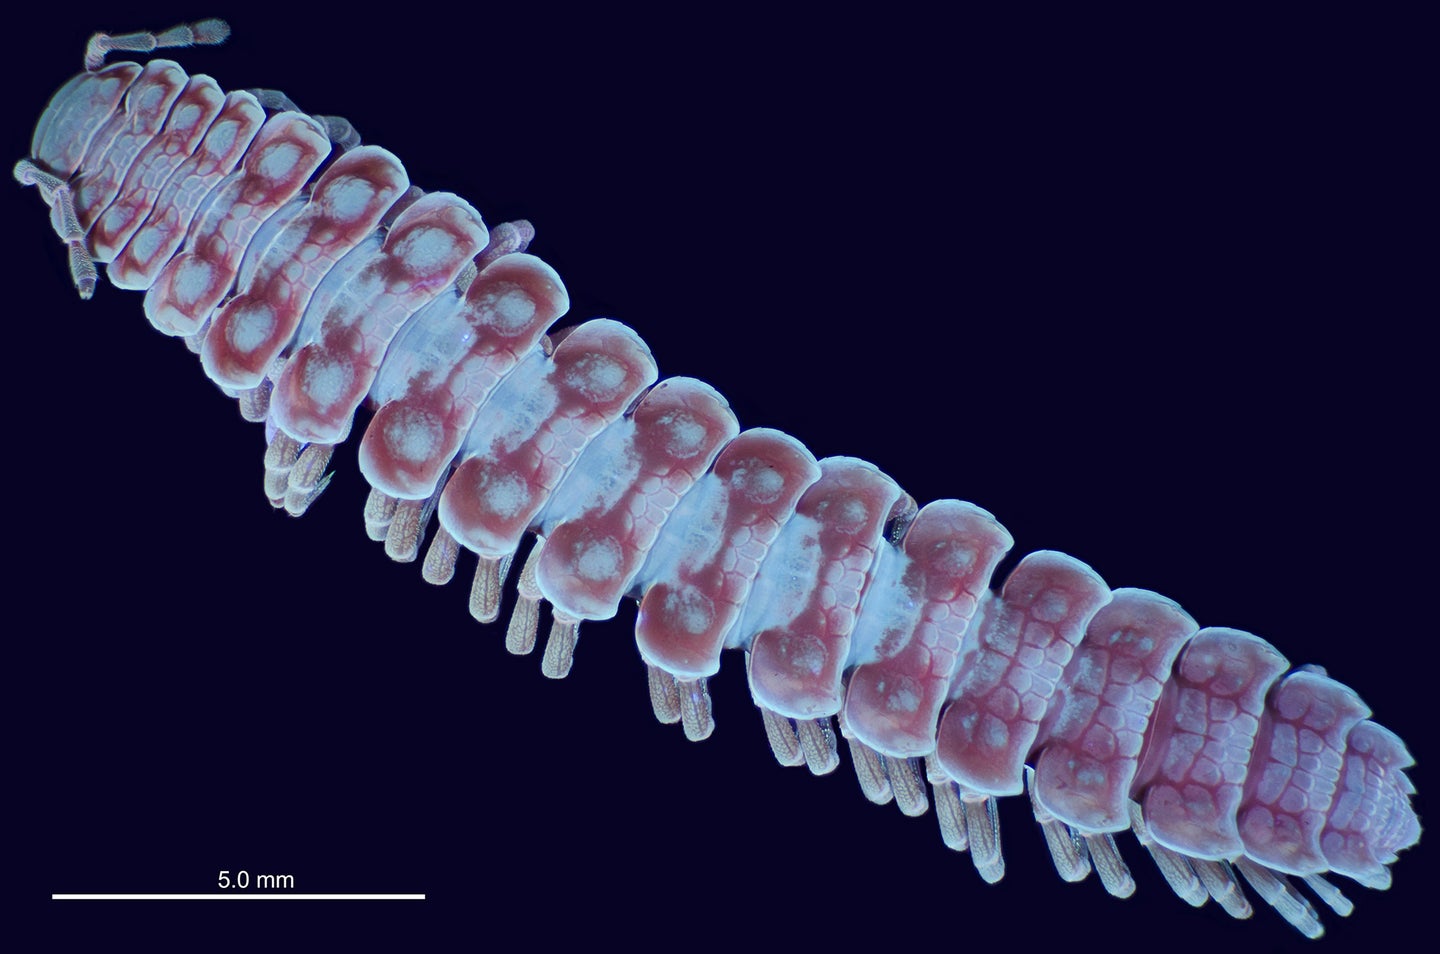 Glowing millipede genitalia give scientists a leg up in the lab